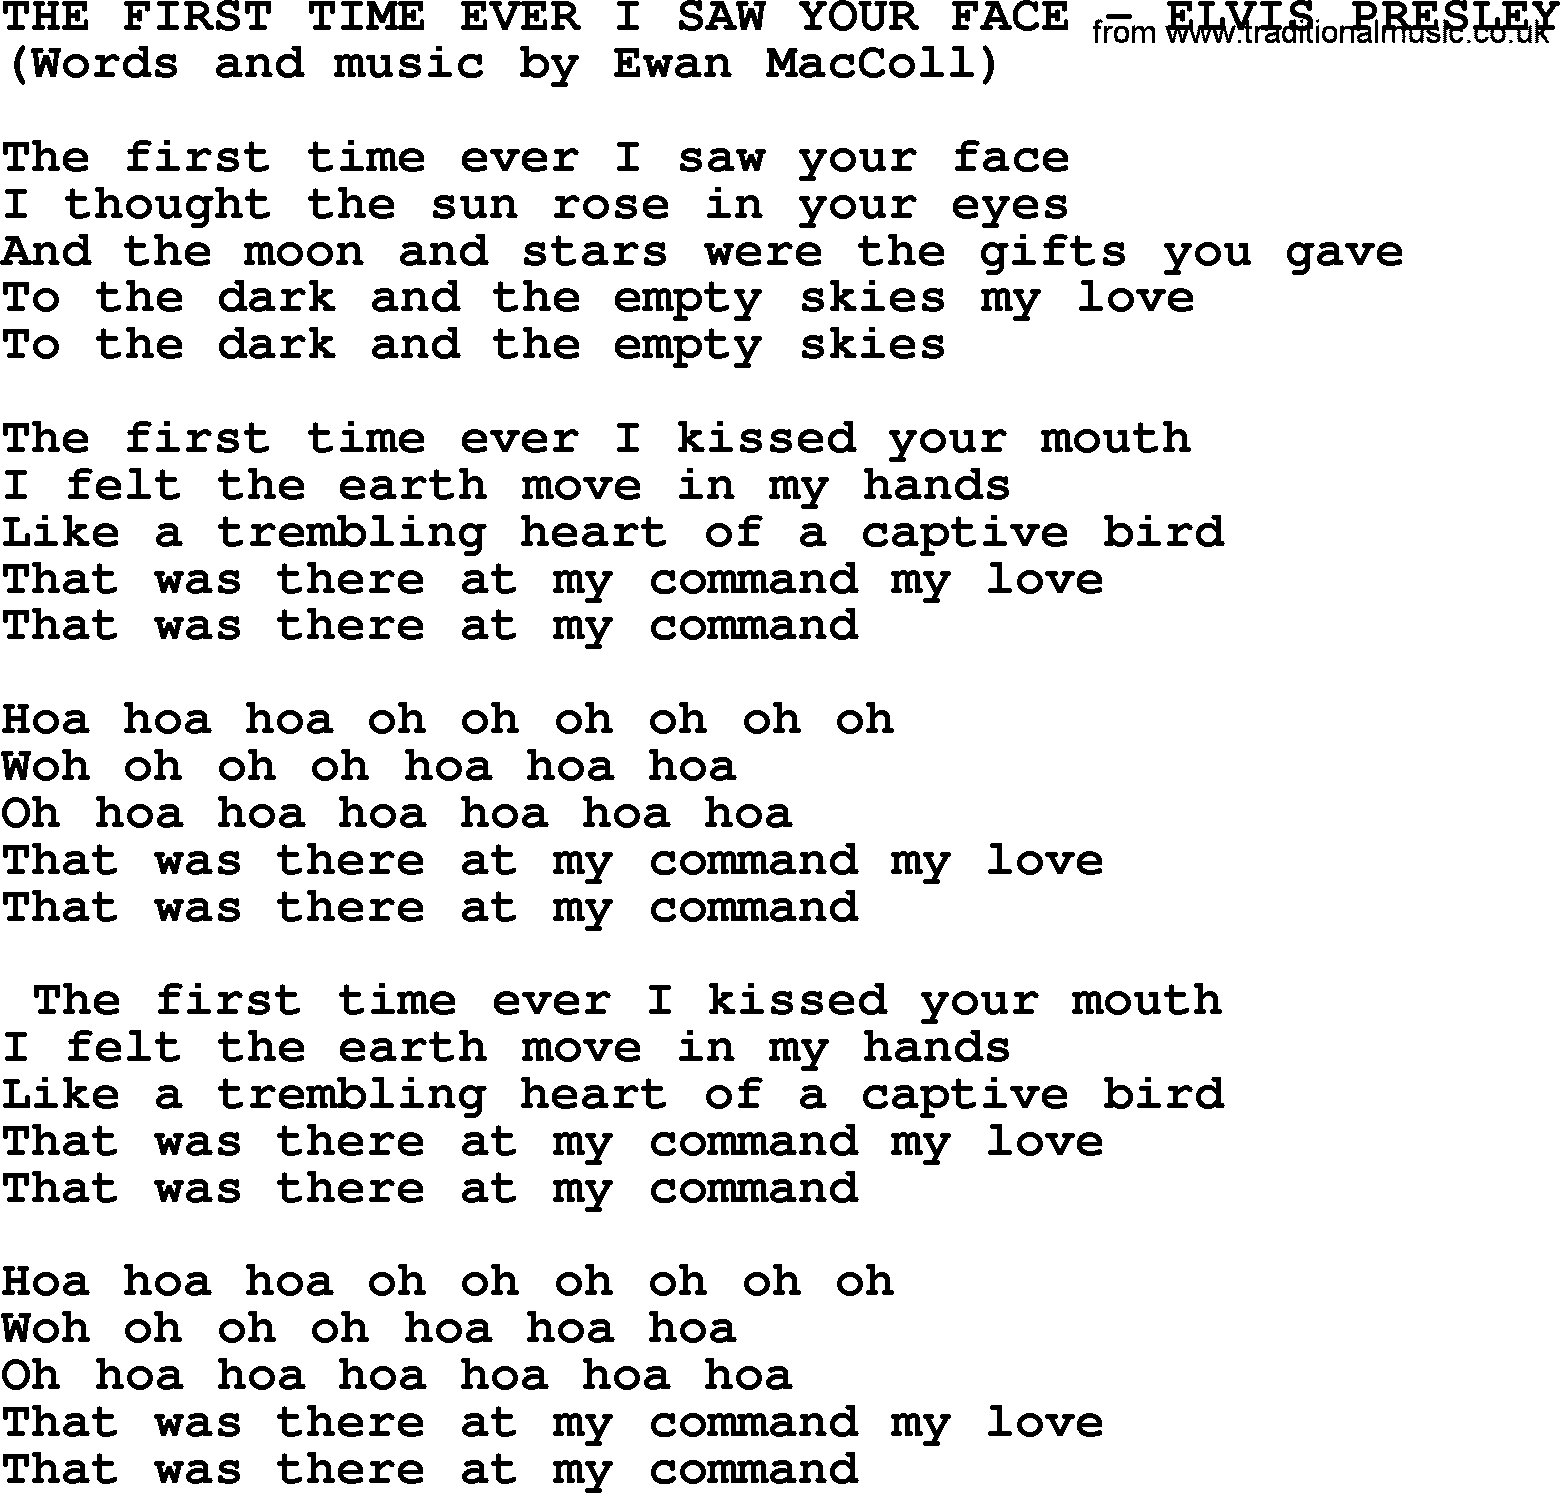 Elvis Presley song: The First Time Ever I Saw Your Face lyrics